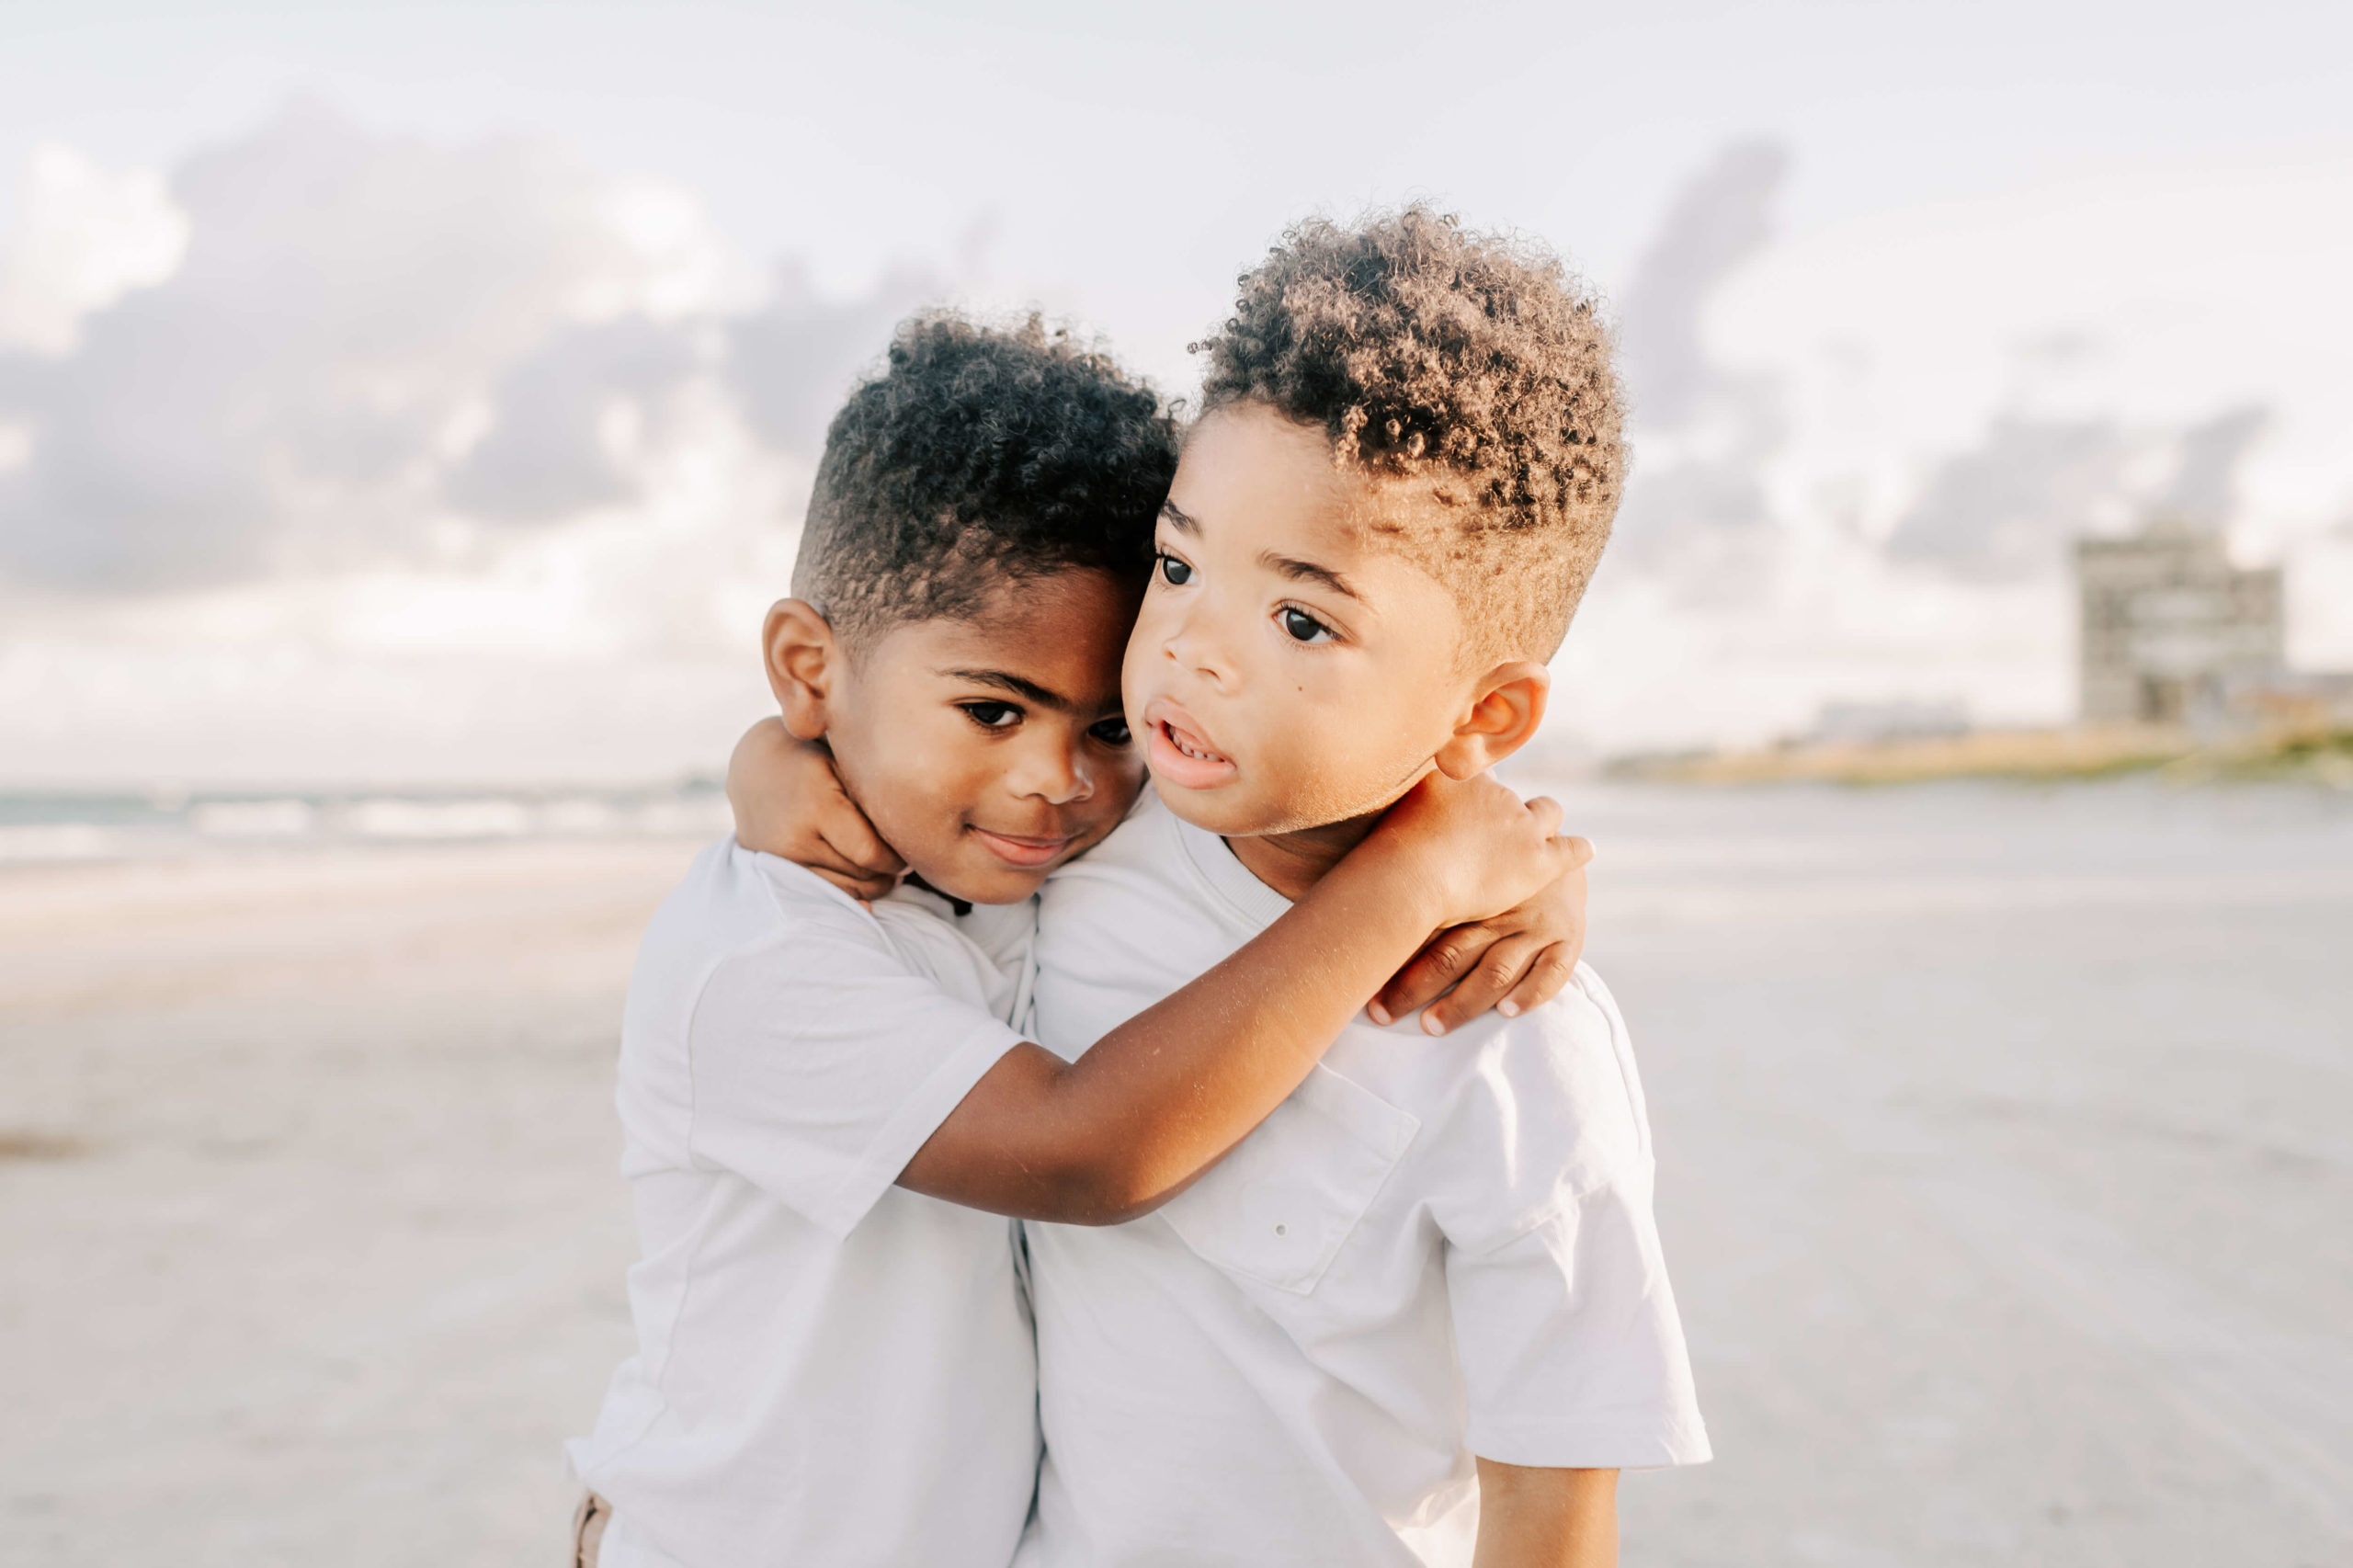 Toddler twin boys hug each other while wearing white shirts on a beach at sunset toys and co